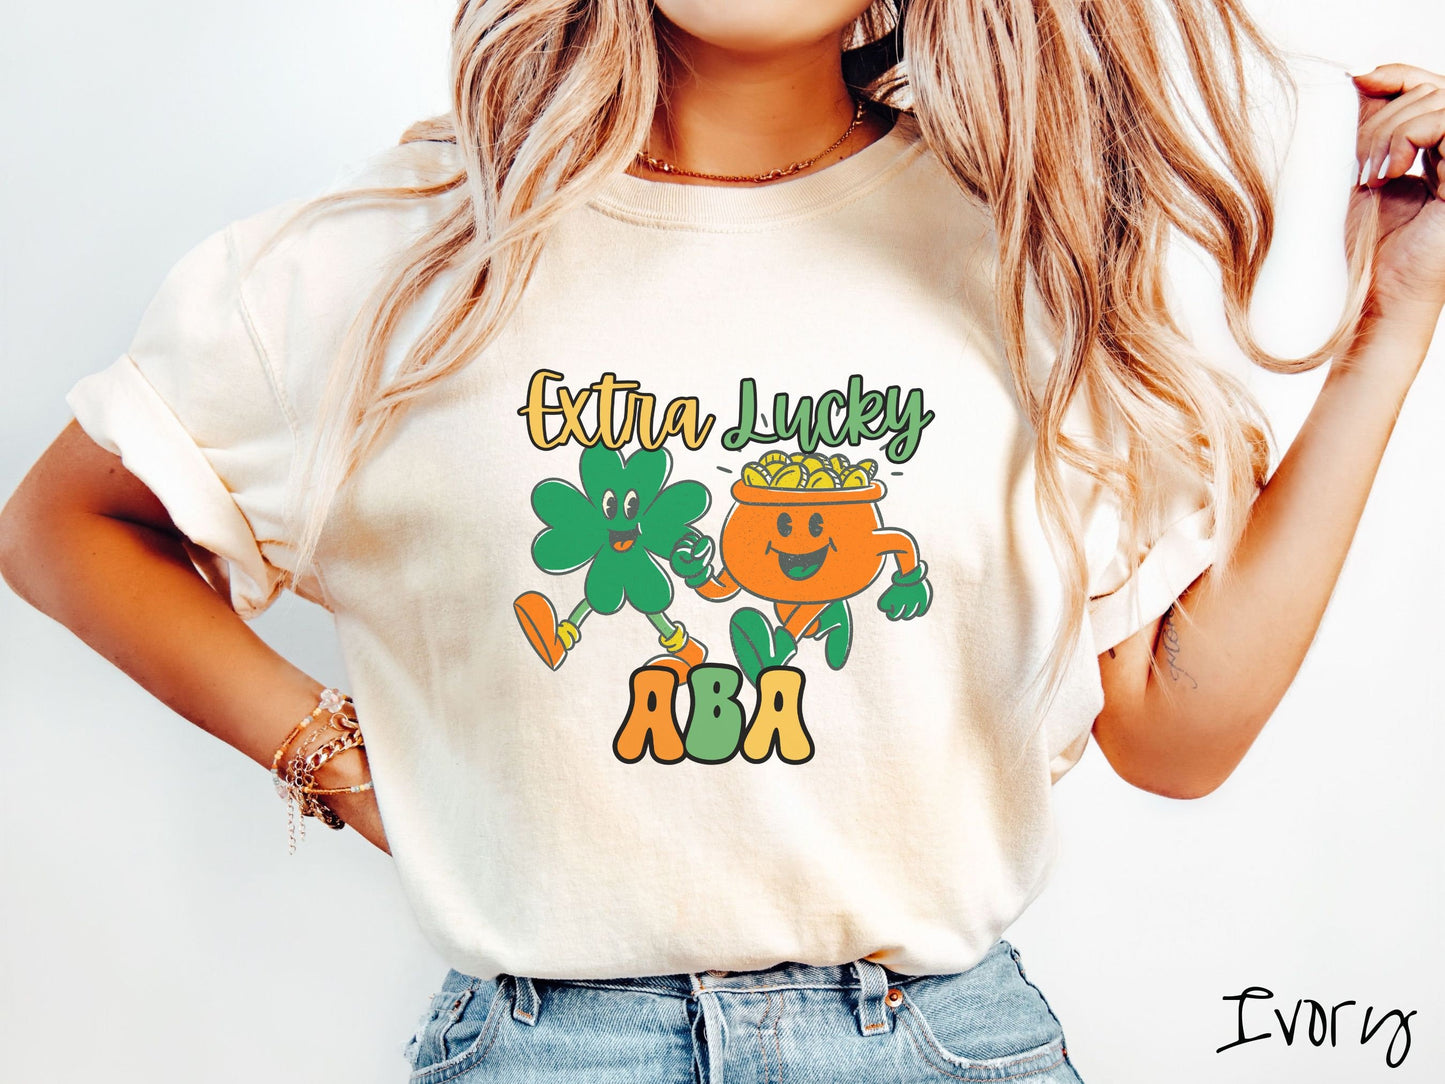 A woman wearing a vintage, ivory colored shirt with the text Extra Lucky ABA in yellow, orange, and green font. Between the text are a green clover and orange pot of gold smiling and walking together in step.